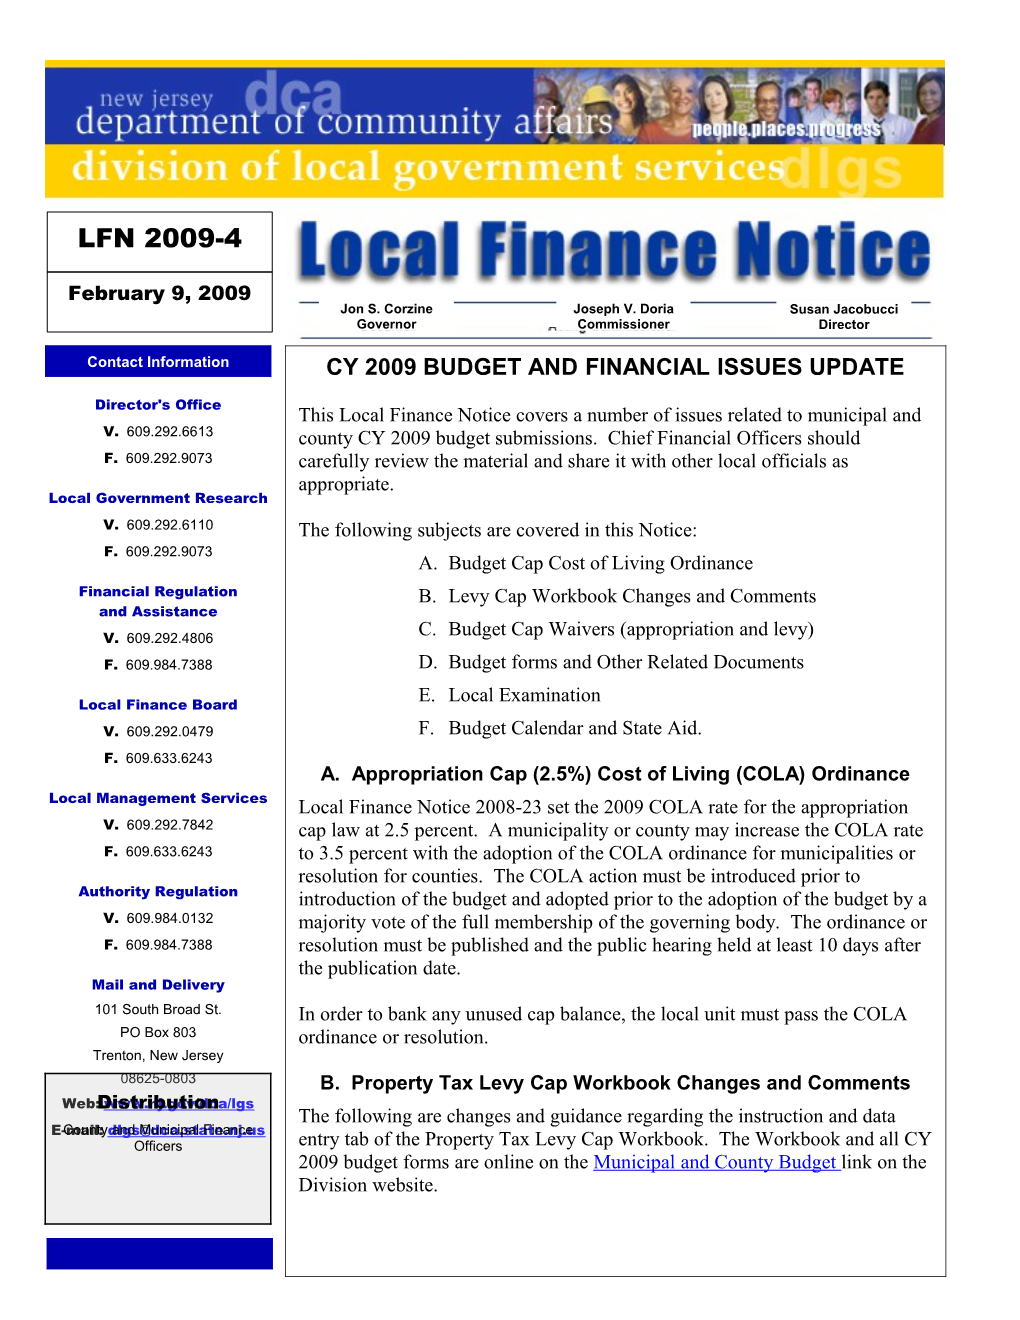 Local Finance Notice2009-4 February 9, 2009 Page 4